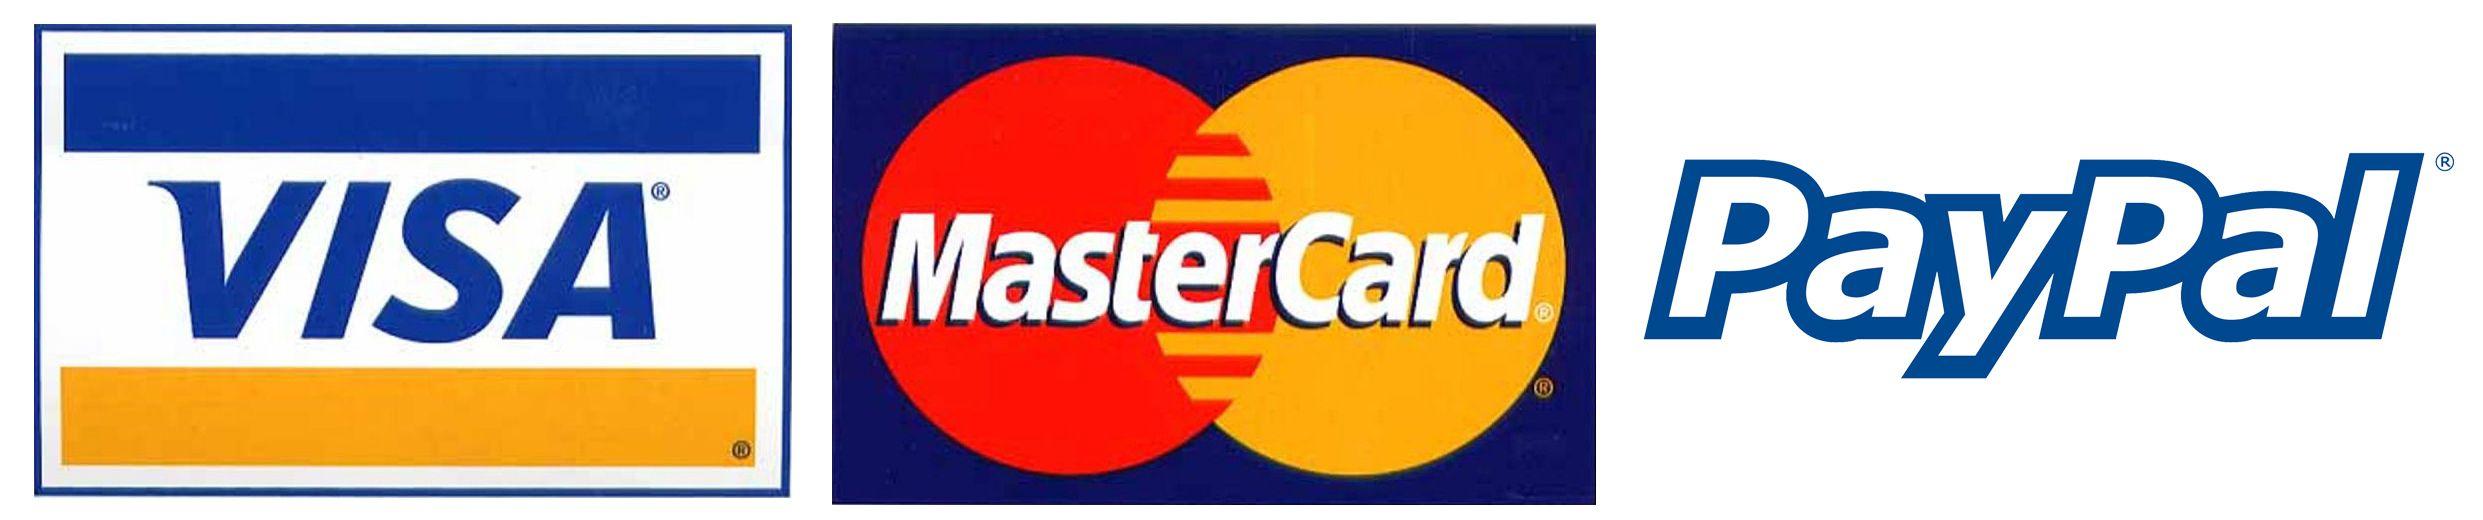 PayPal Visa MasterCard Logo - Payment - BS Atelier